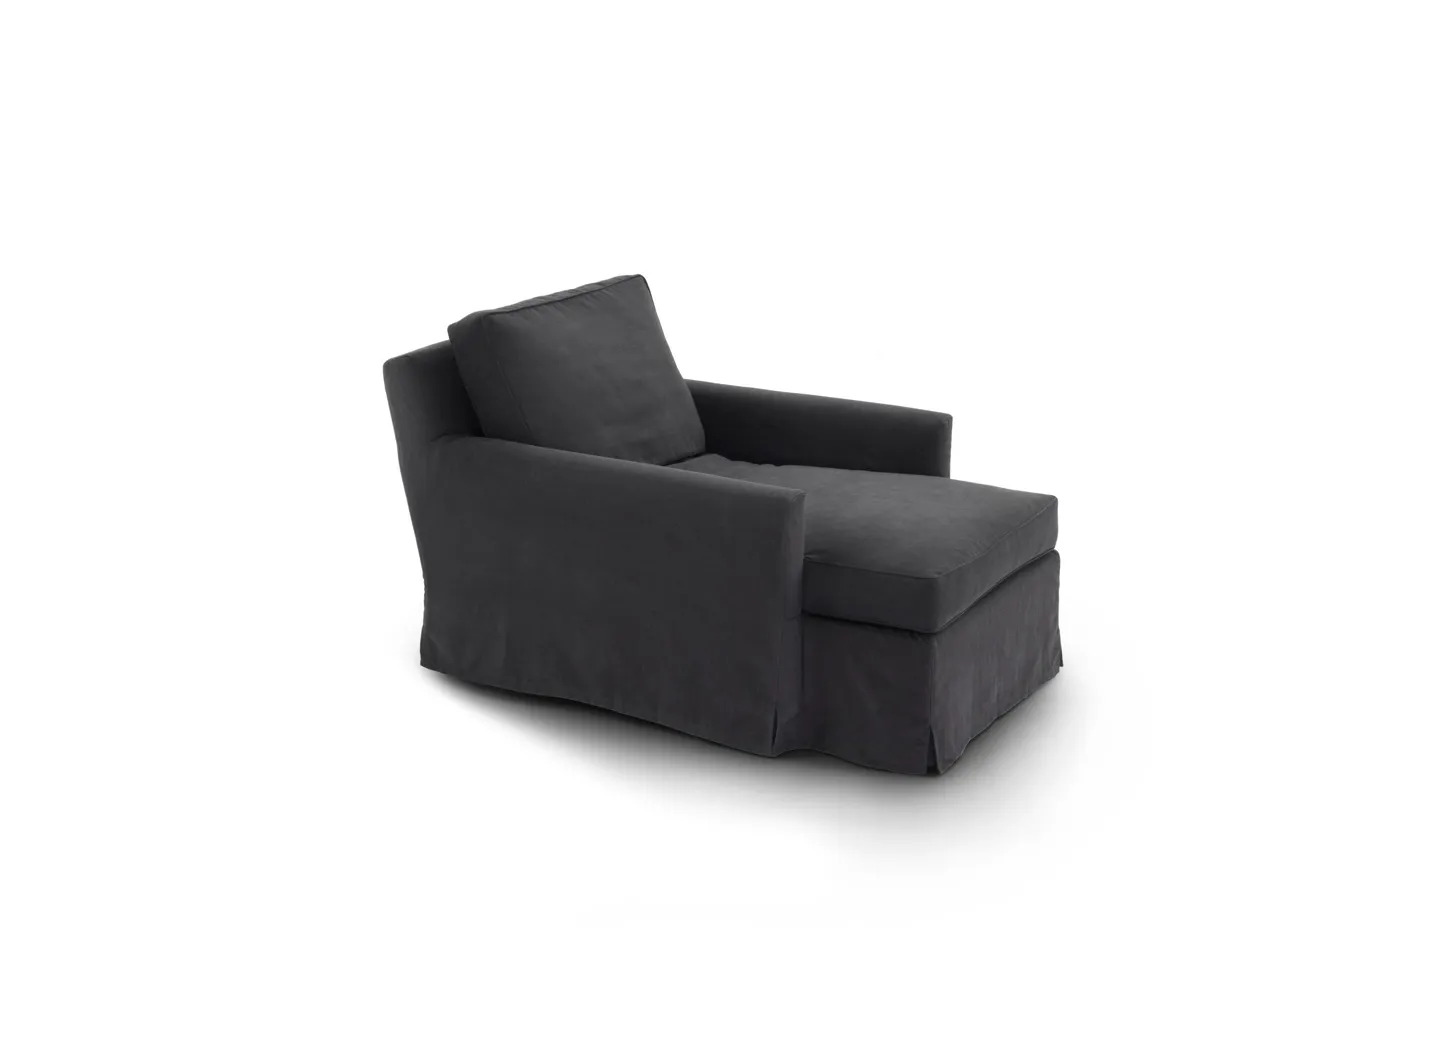 Cousy chaise longue